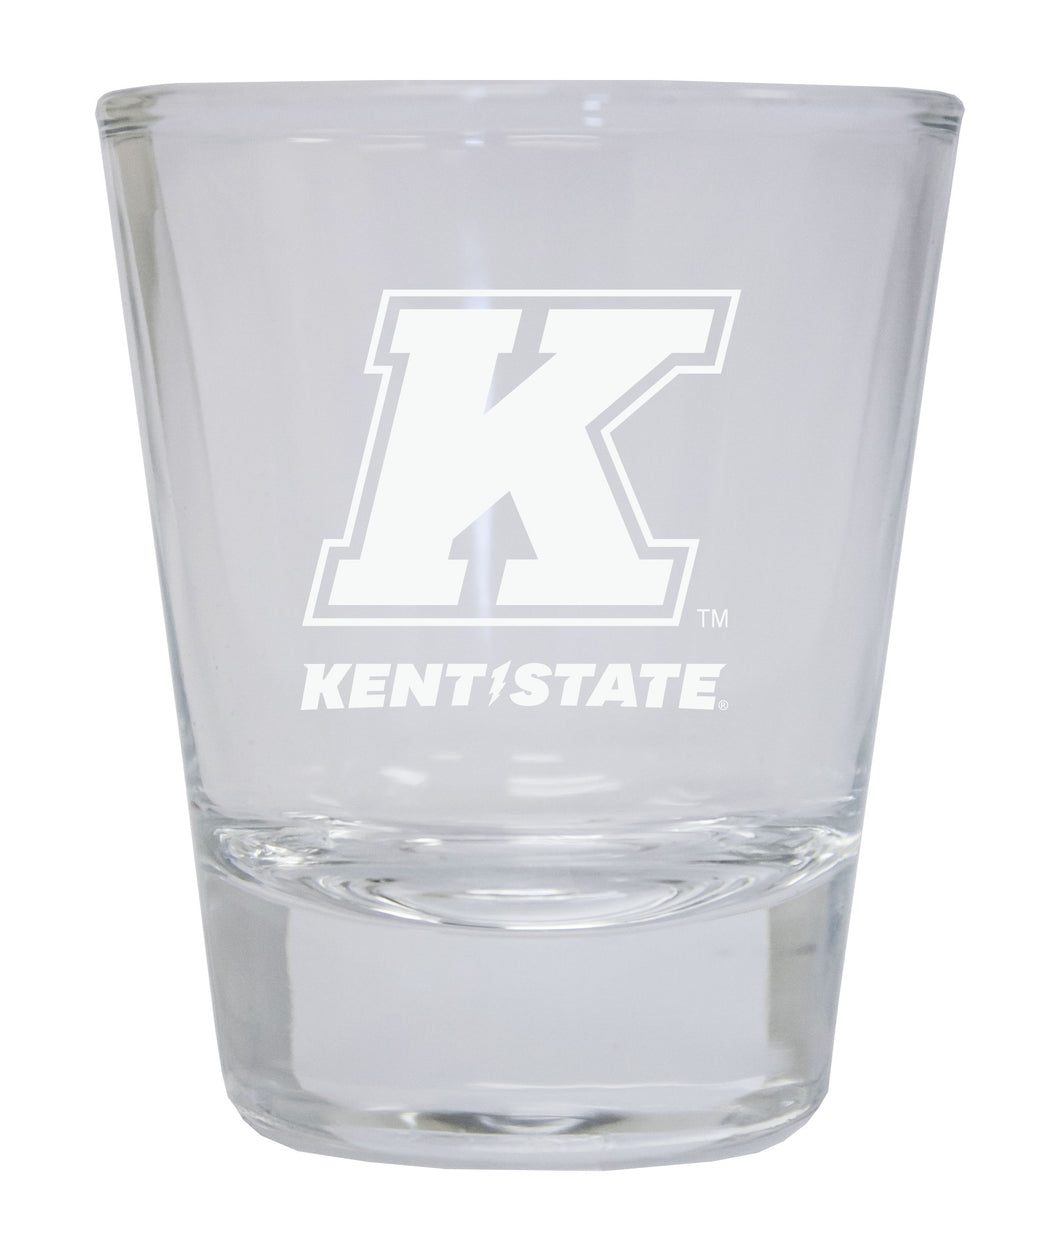 Kent State University Etched Round Shot Glass Officially Licensed Collegiate Product